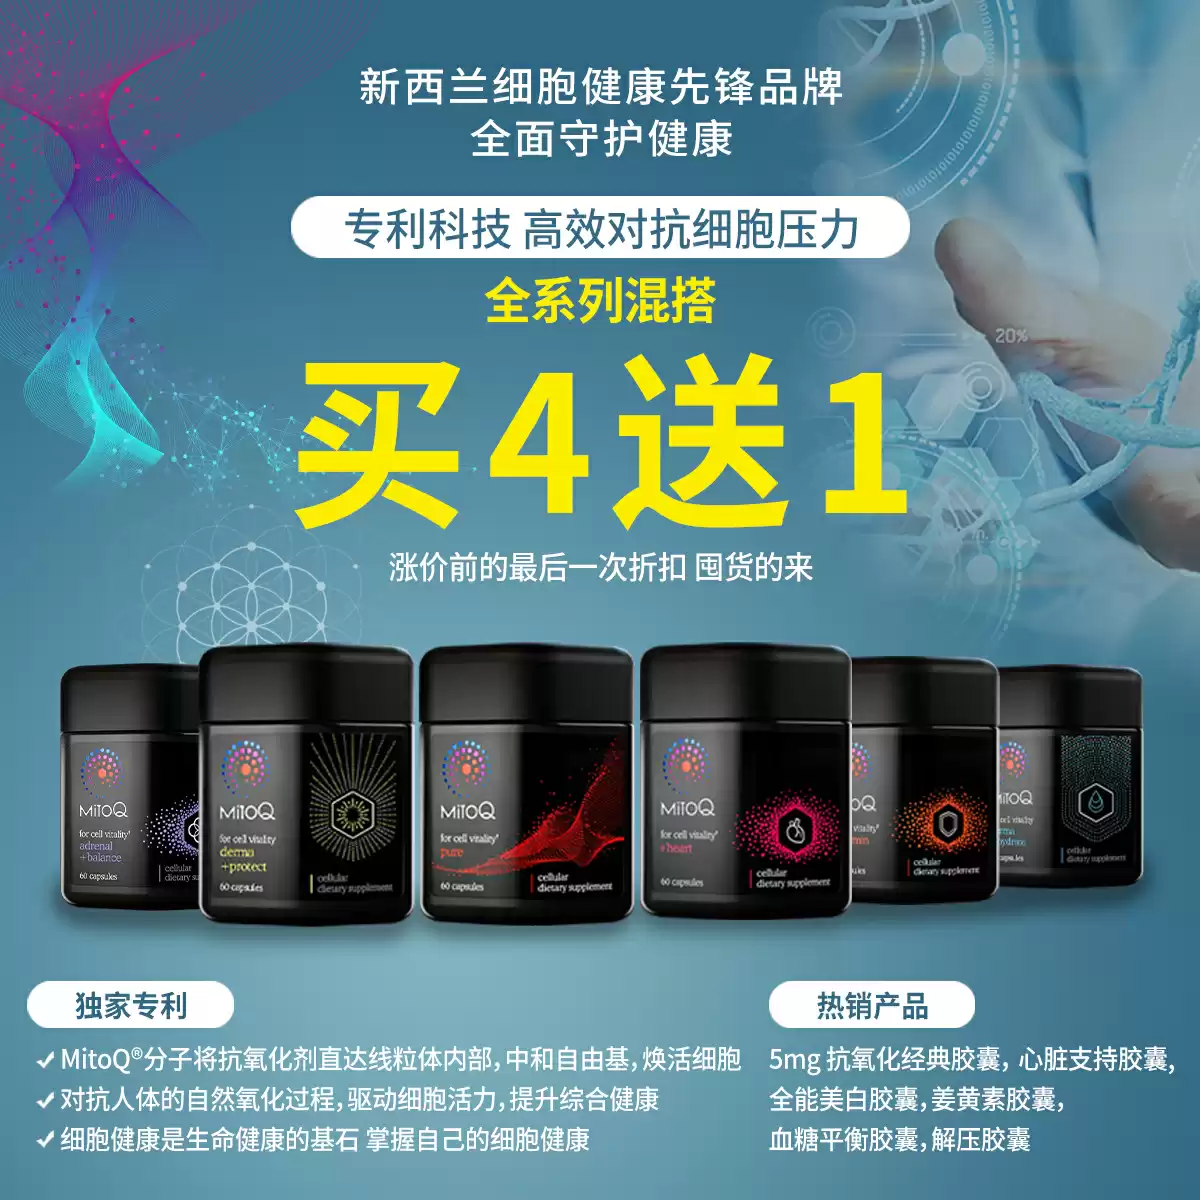 MitoQ brand promotion buy 4 get 1 for free